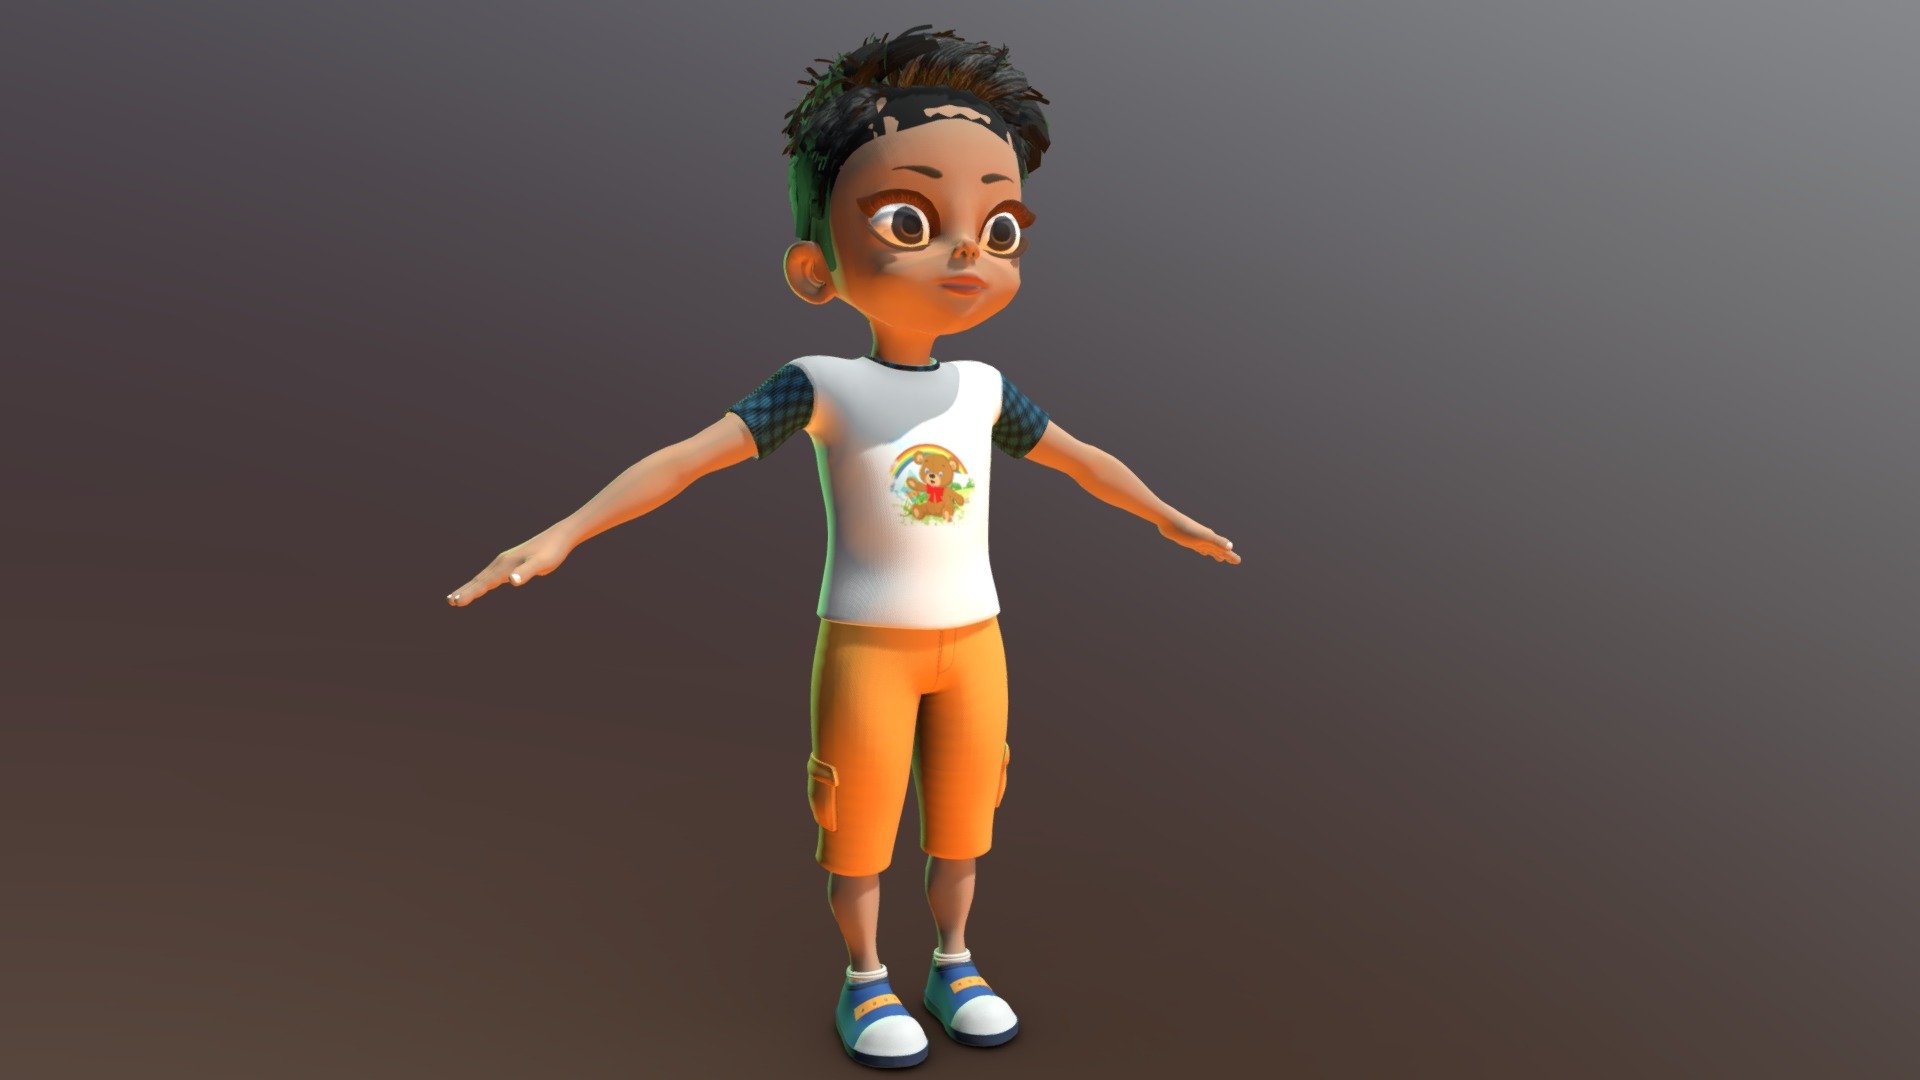 If You Want To Download This Character Contact Me On My Email Or My WhatAapp
WhatsApp Number_+923332889866
Email_heromusab4@gmail.com - JOSEPH BOY CHARACTER - 3D model by MusabAnsari (@MusabIbnUmar) 3d model